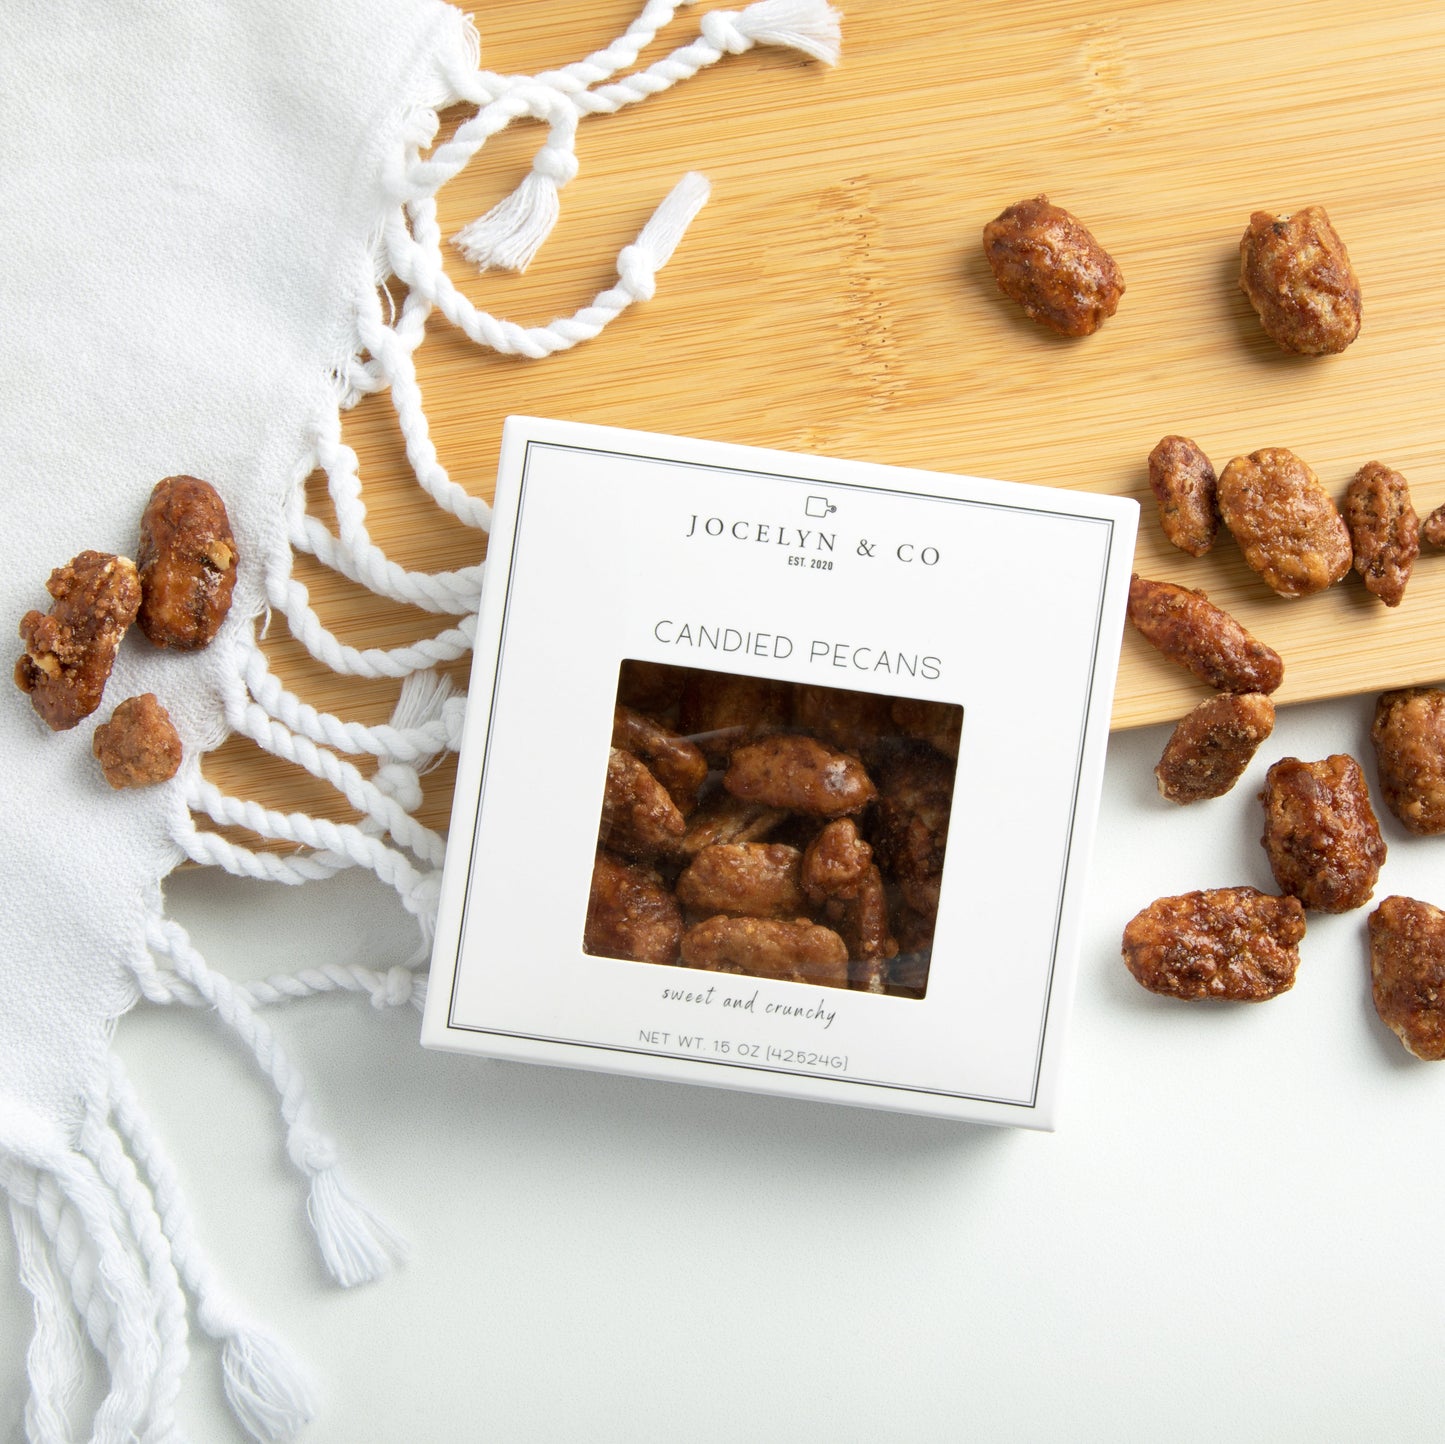 Private Label Packaging Only for Candied Pecans-500